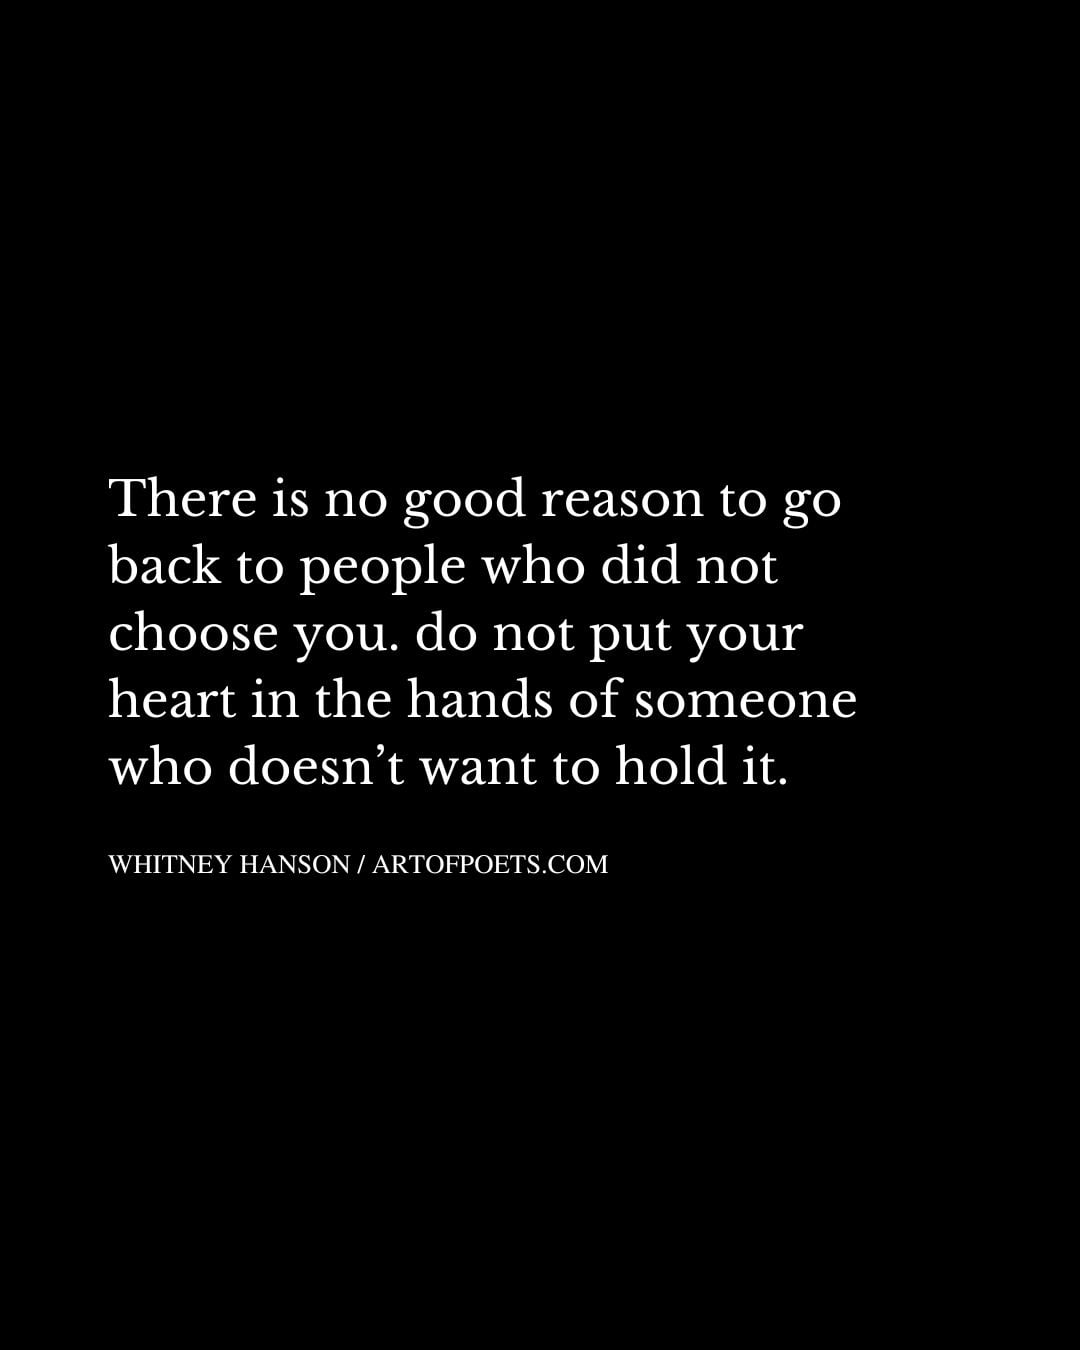 There is no good reason to go back to people who did not choose you. do not put your heart in the hands of someone who doesnt want to hold it